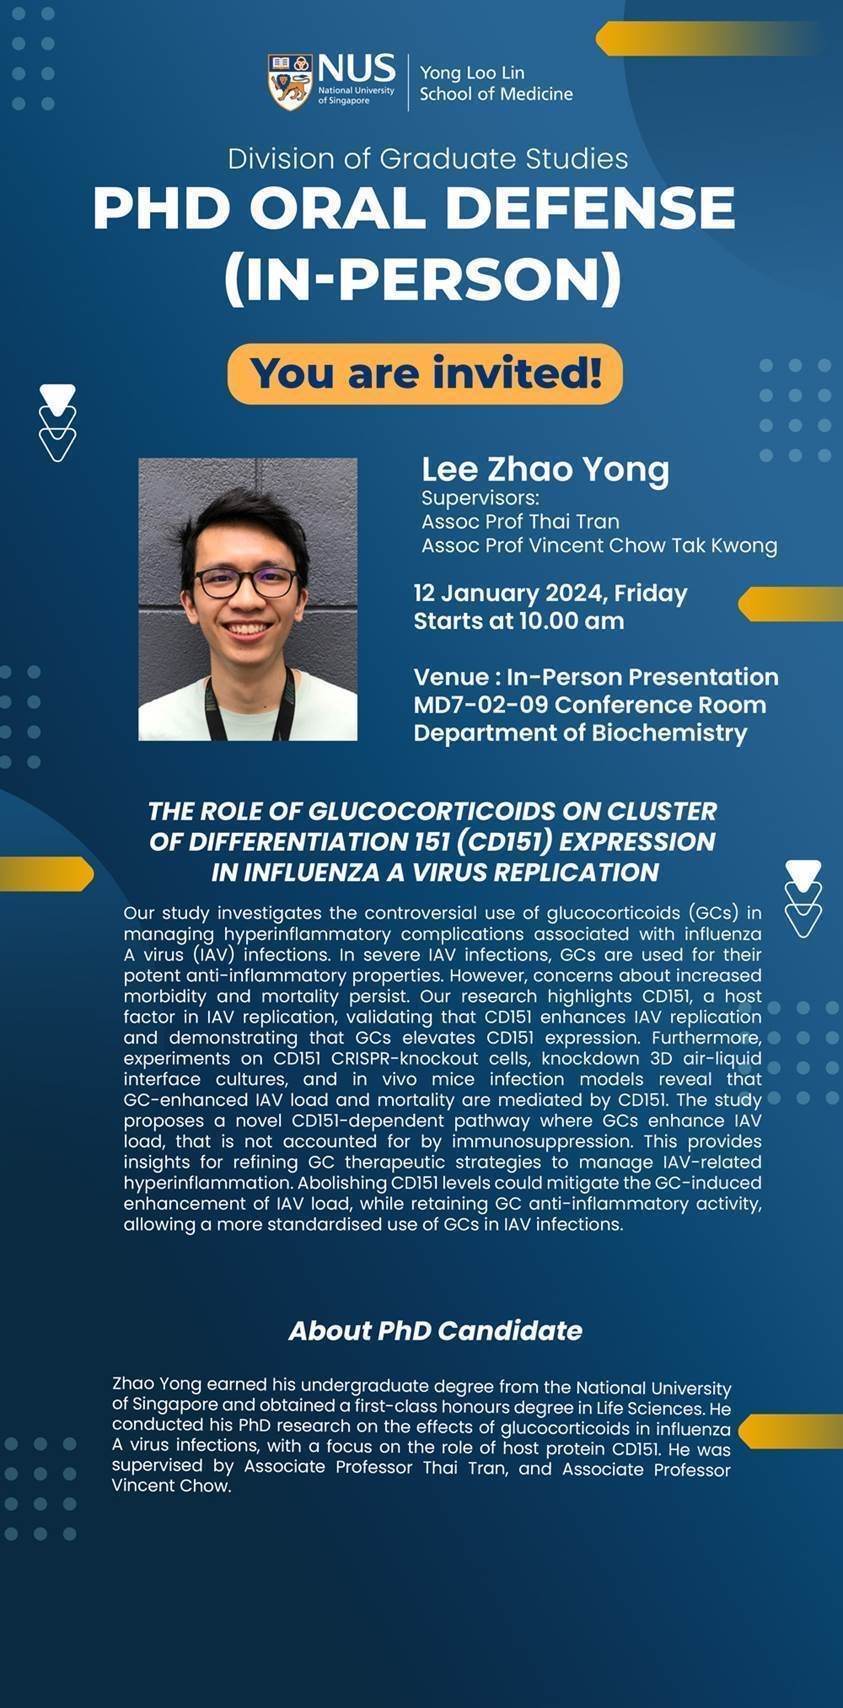 PHD Oral Defense (In-Person) – Lee Zhao Yong